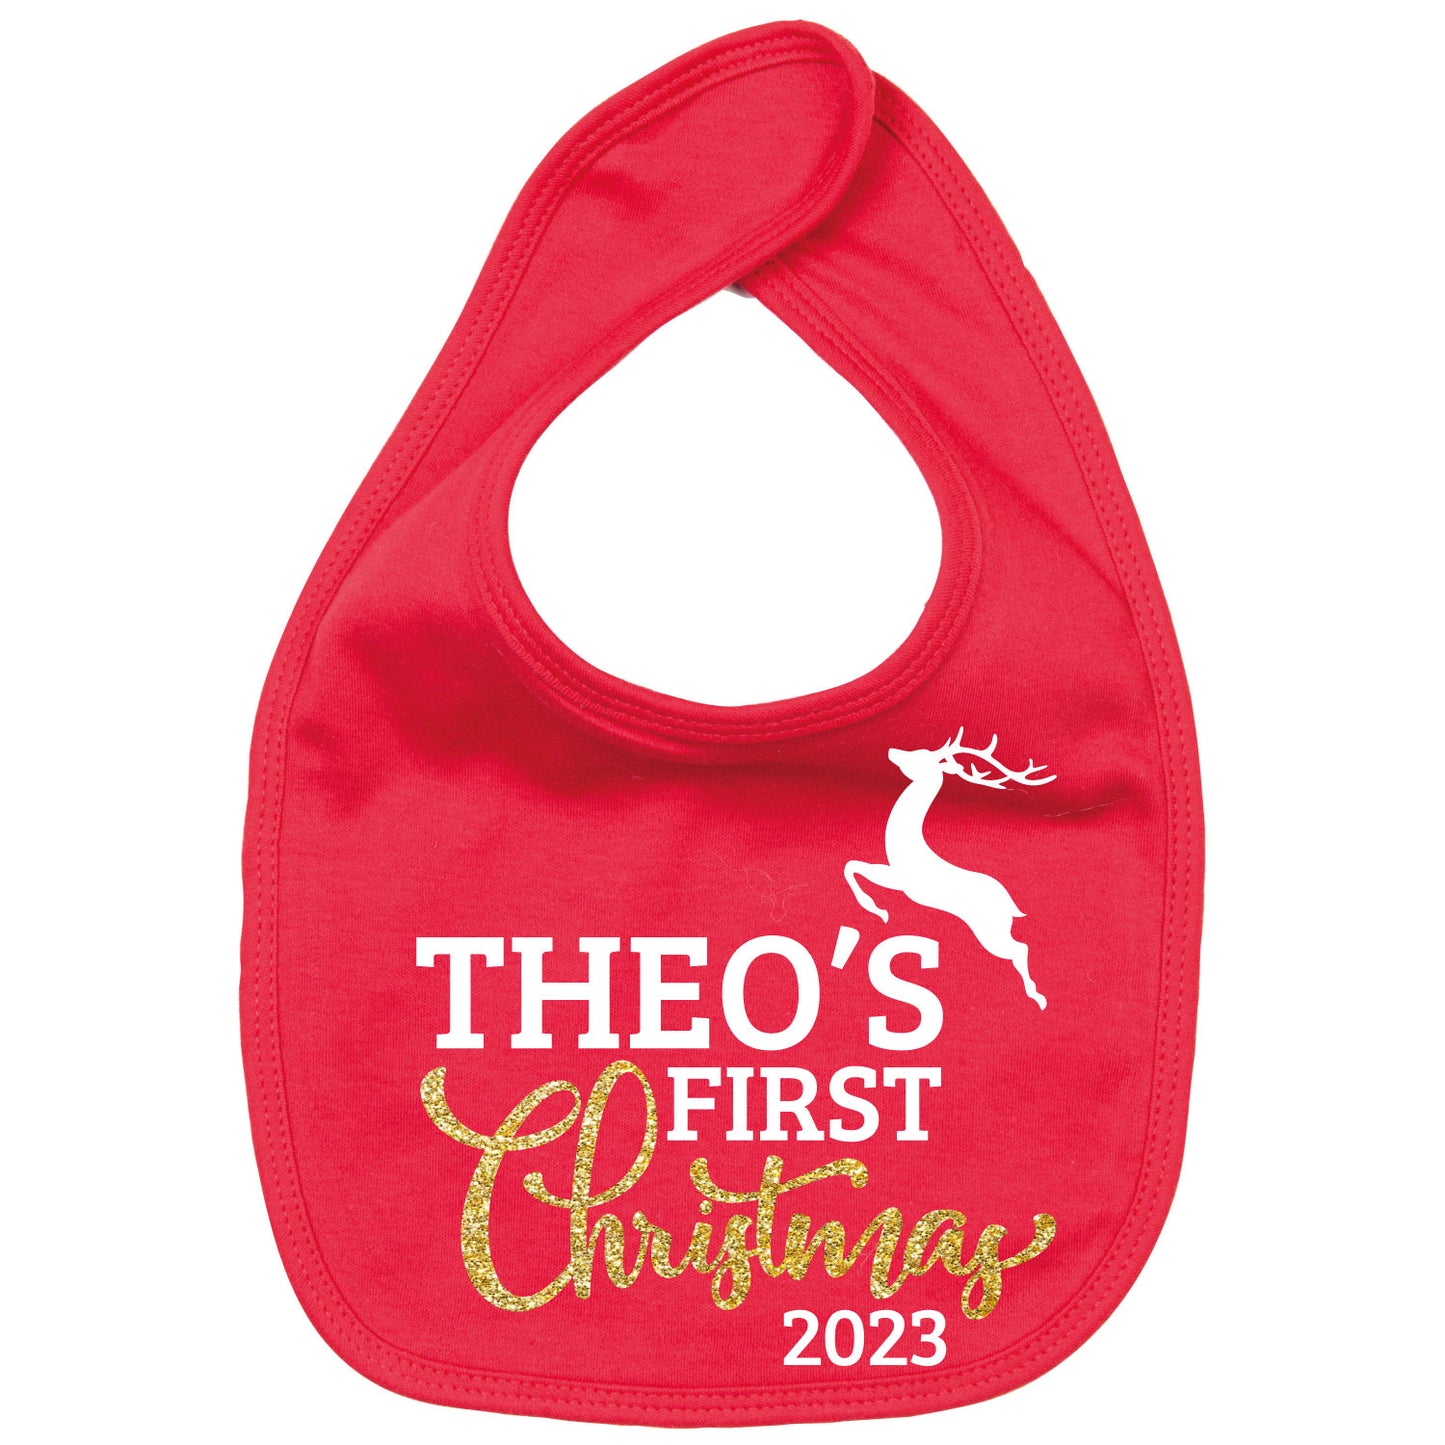 Baby's First Christmas Bib with gold glitter design